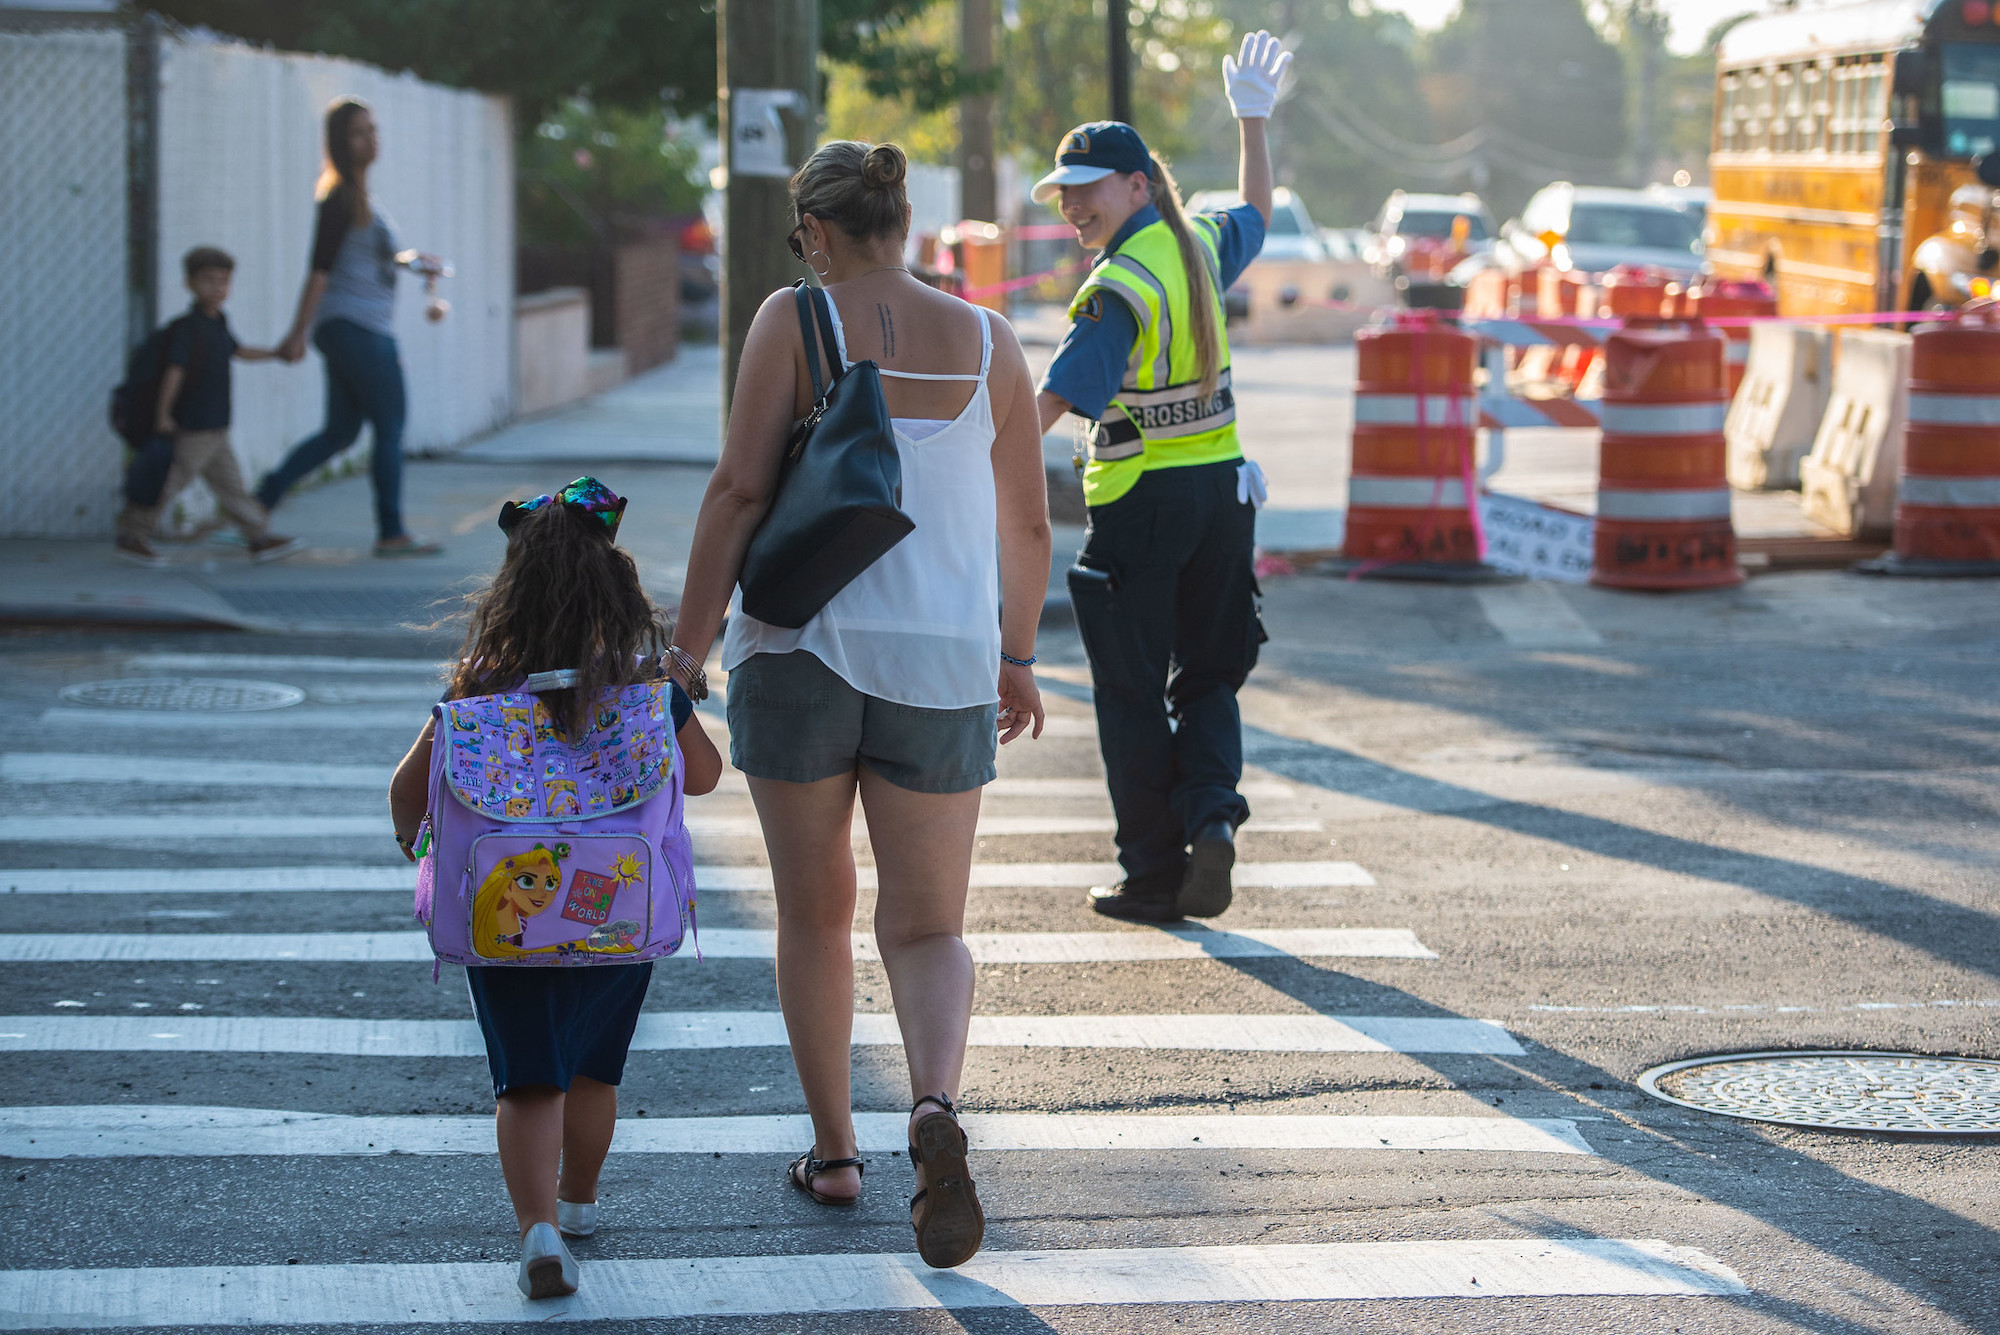 A crossing guard helps a woman and a child cross the street.